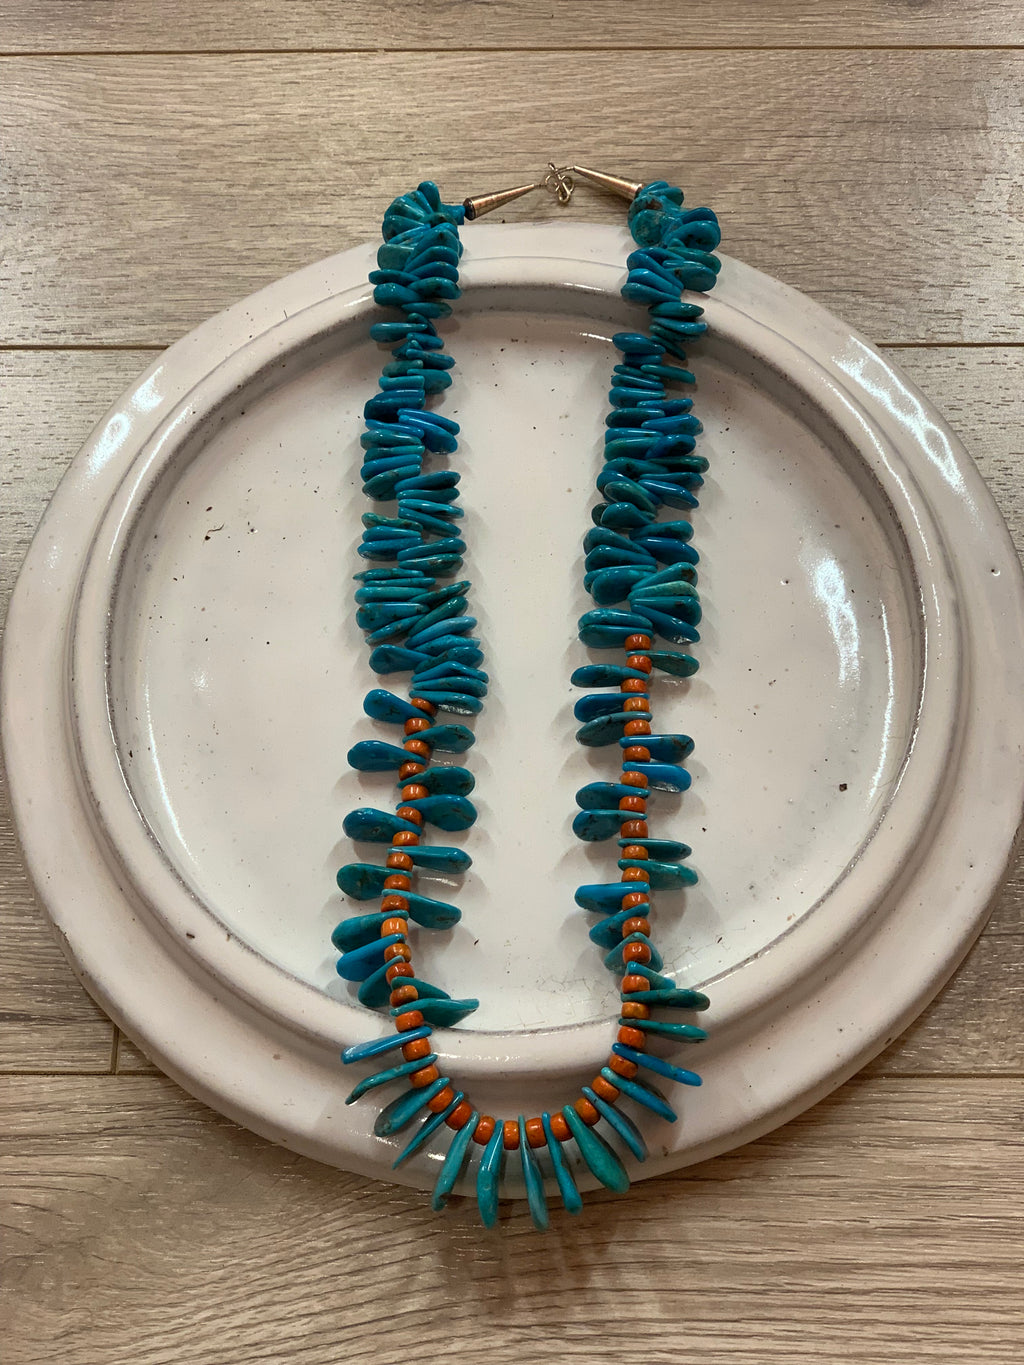 Turquoise & Coral Necklace - Stones - 375